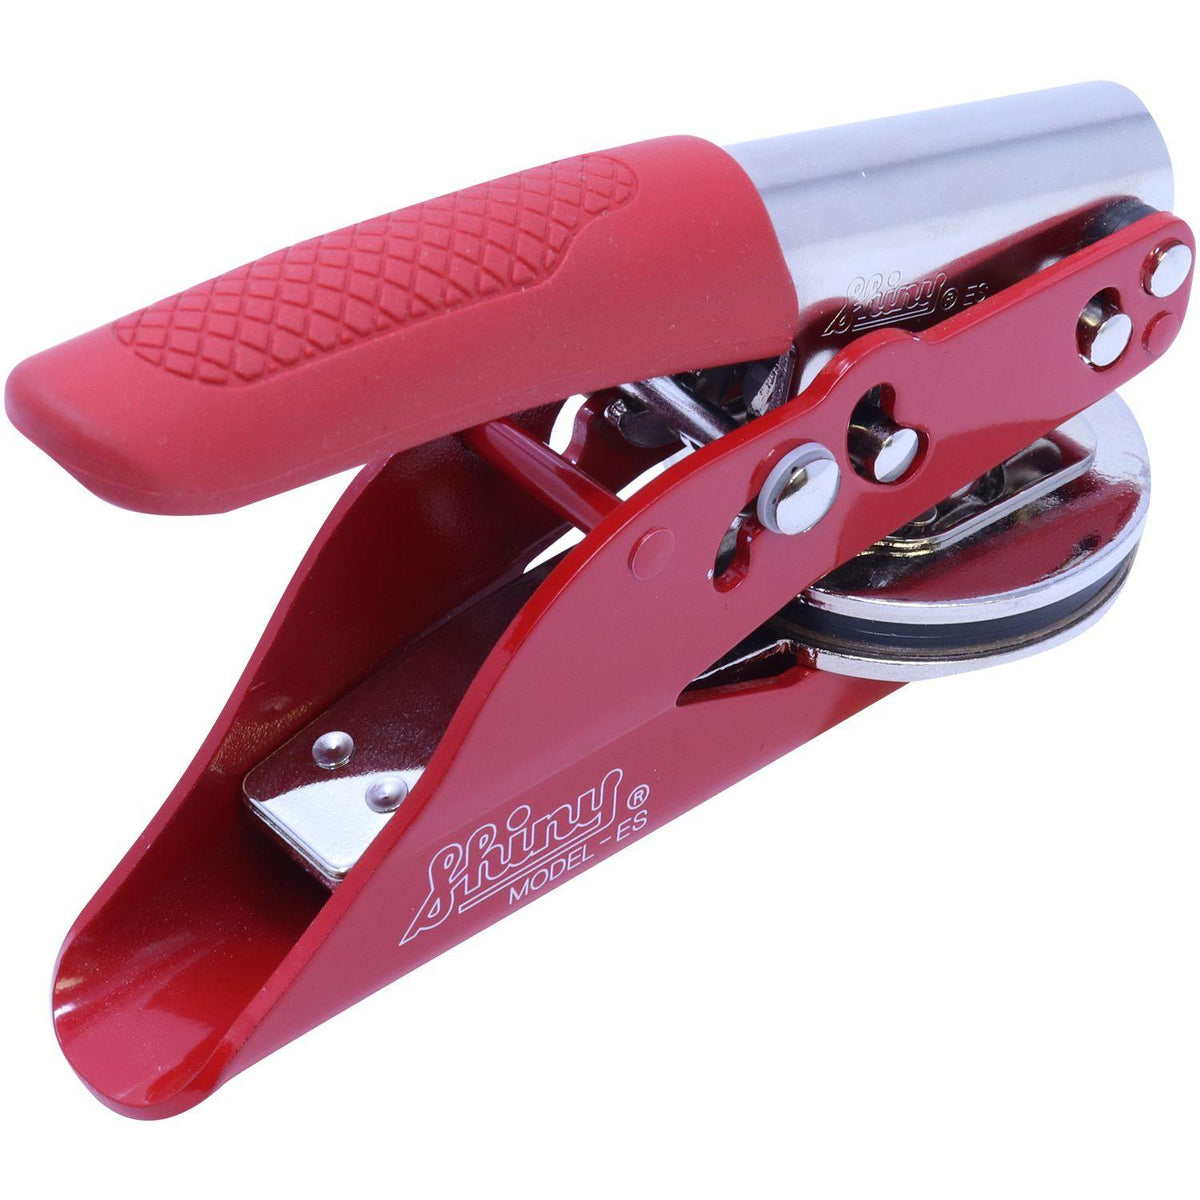 Geologist Red Soft Seal Embosser - Engineer Seal Stamps - Embosser Type_Handheld, Embosser Type_Soft Seal, Type of Use_Professional